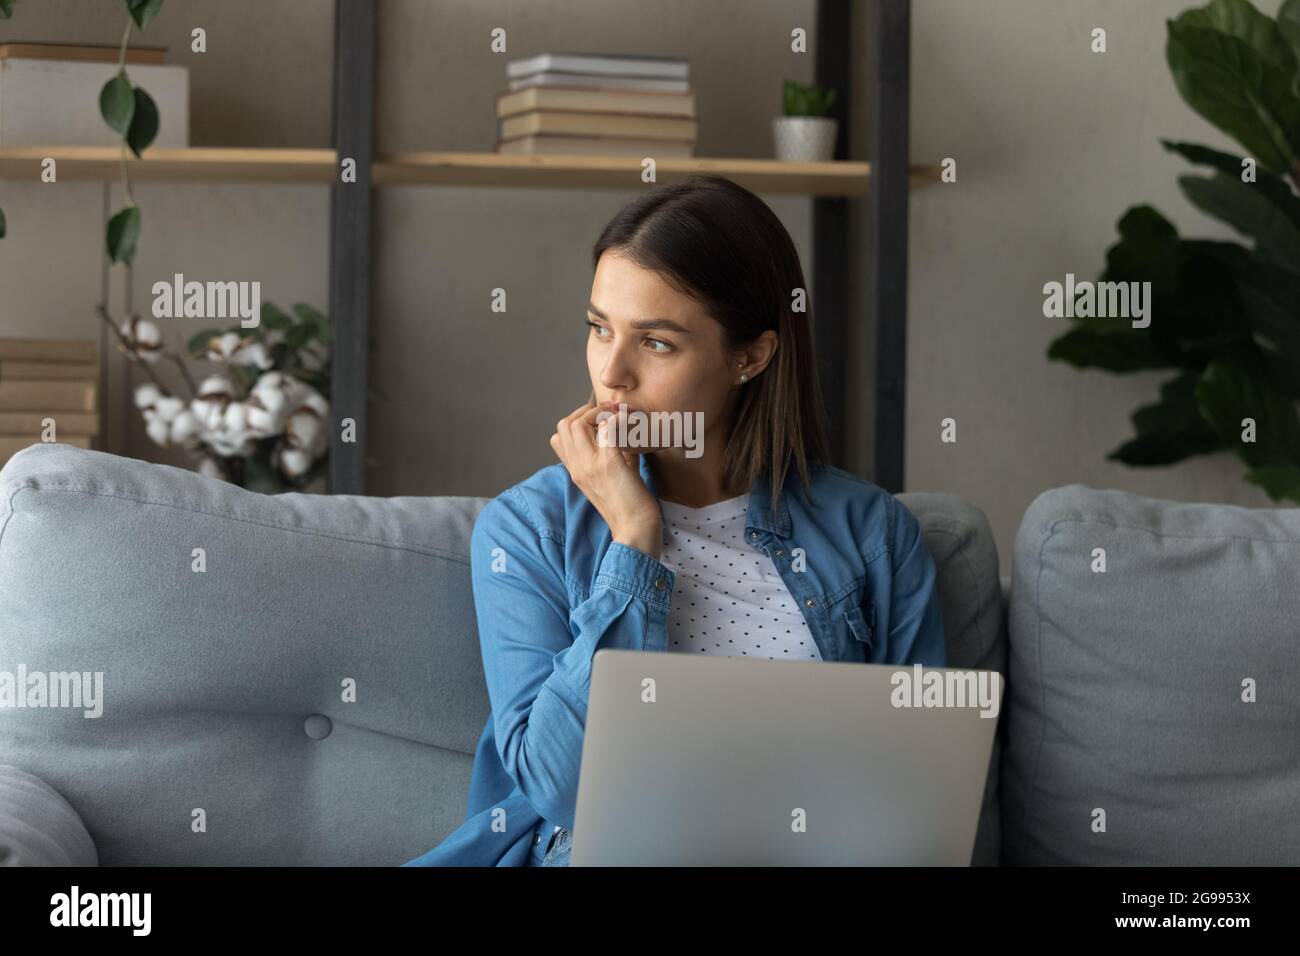 Pensive woman sit on sofa with laptop Stock Photo